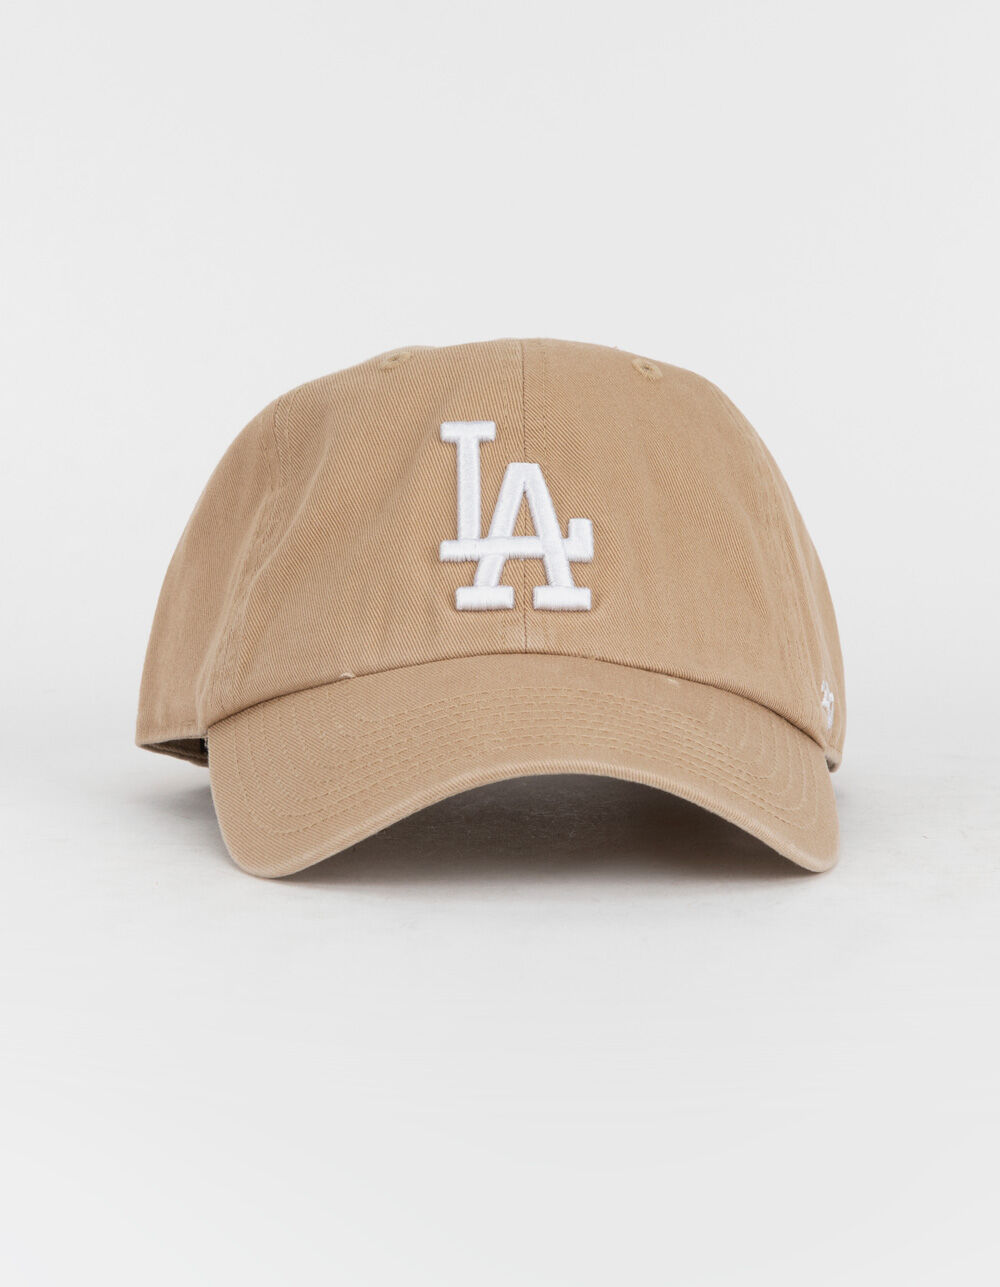 47 Brand Los Angeles Dodgers Olive White CLEAN UP Cap - Macy's